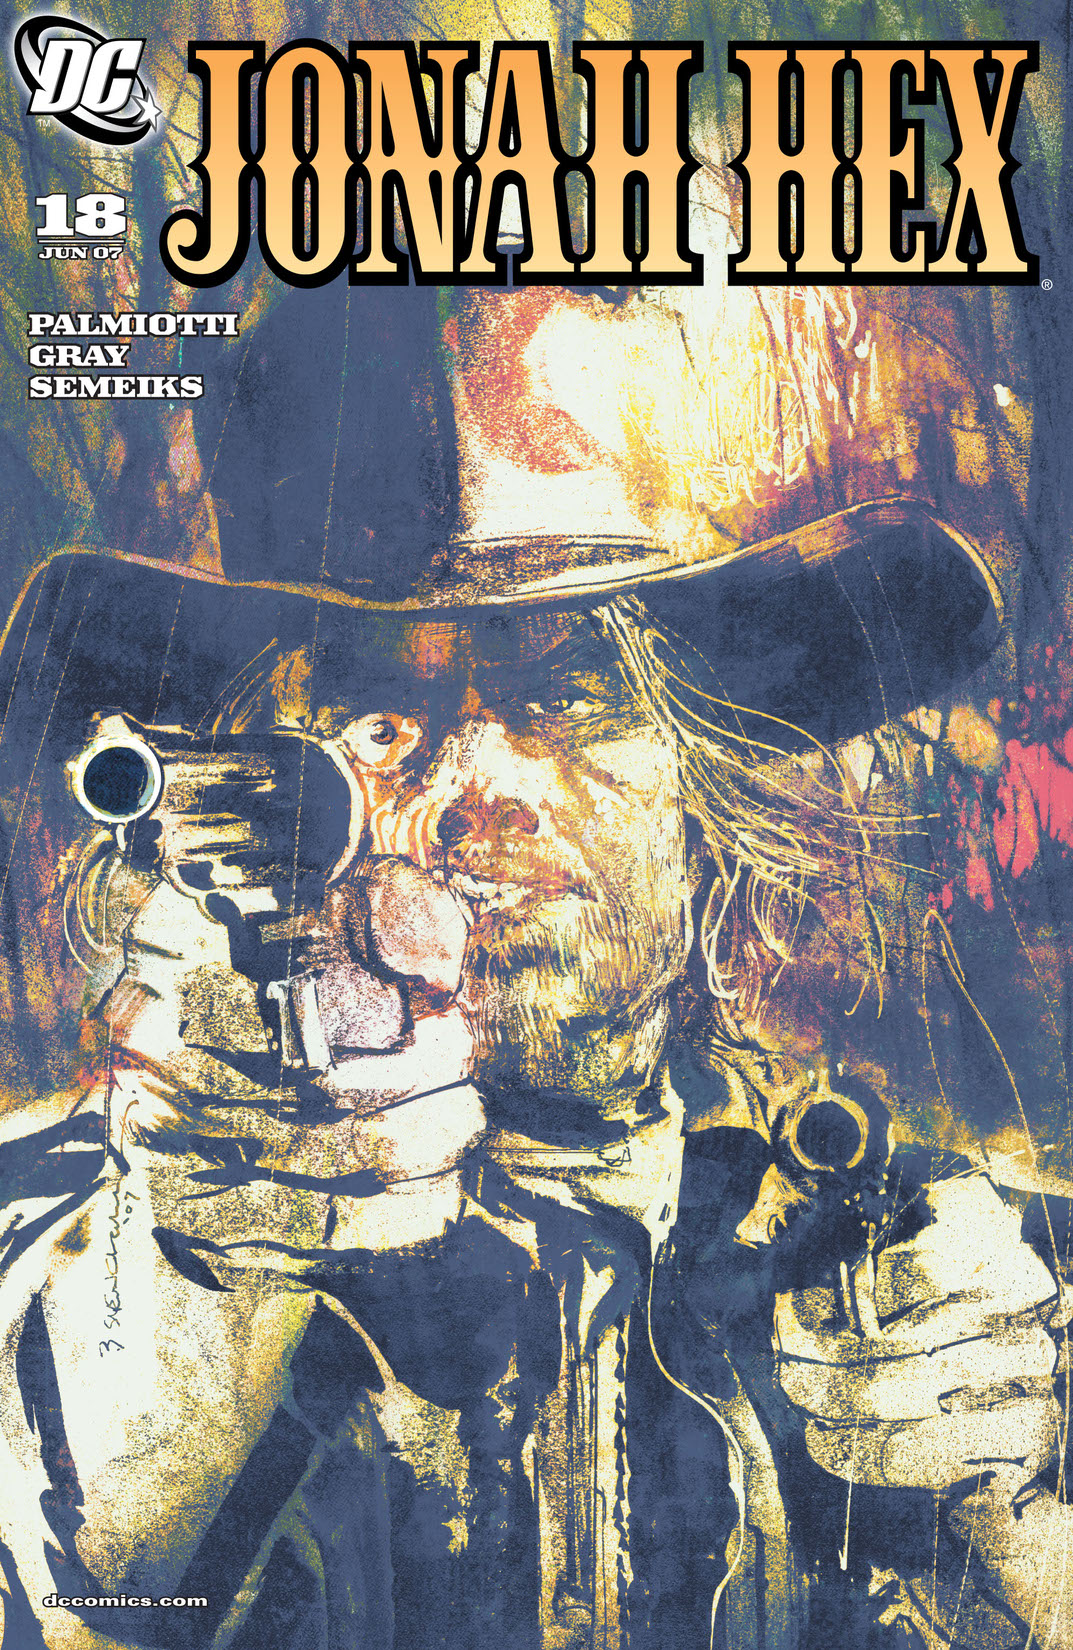 Jonah Hex #18 preview images